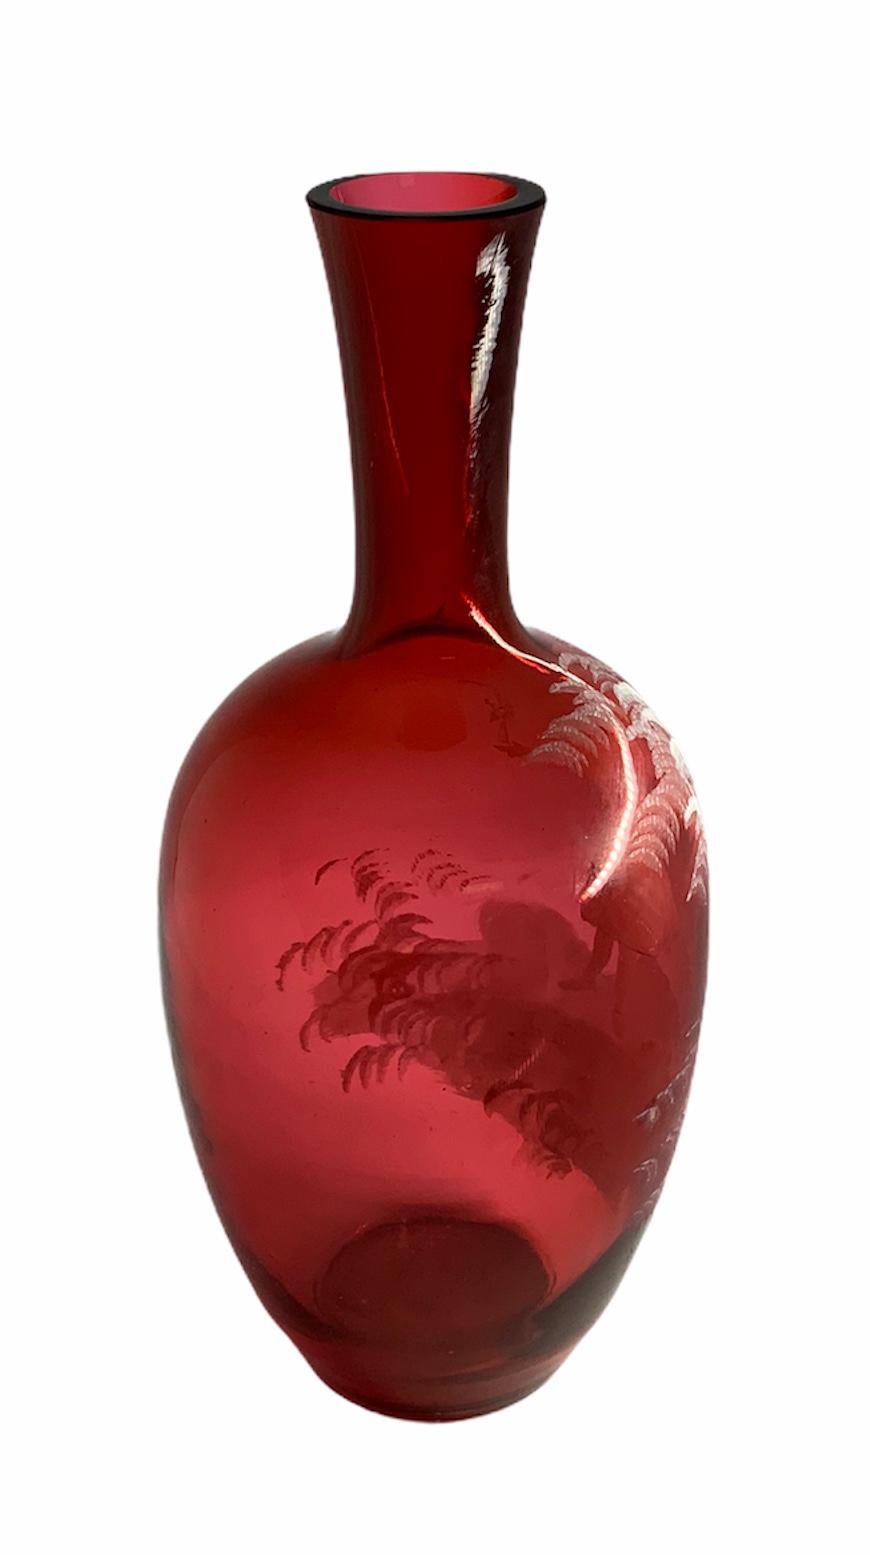 This a Mary Gregory red glass depicting a white enamel painting of a girl gathering wood sticks & branches in the forest.